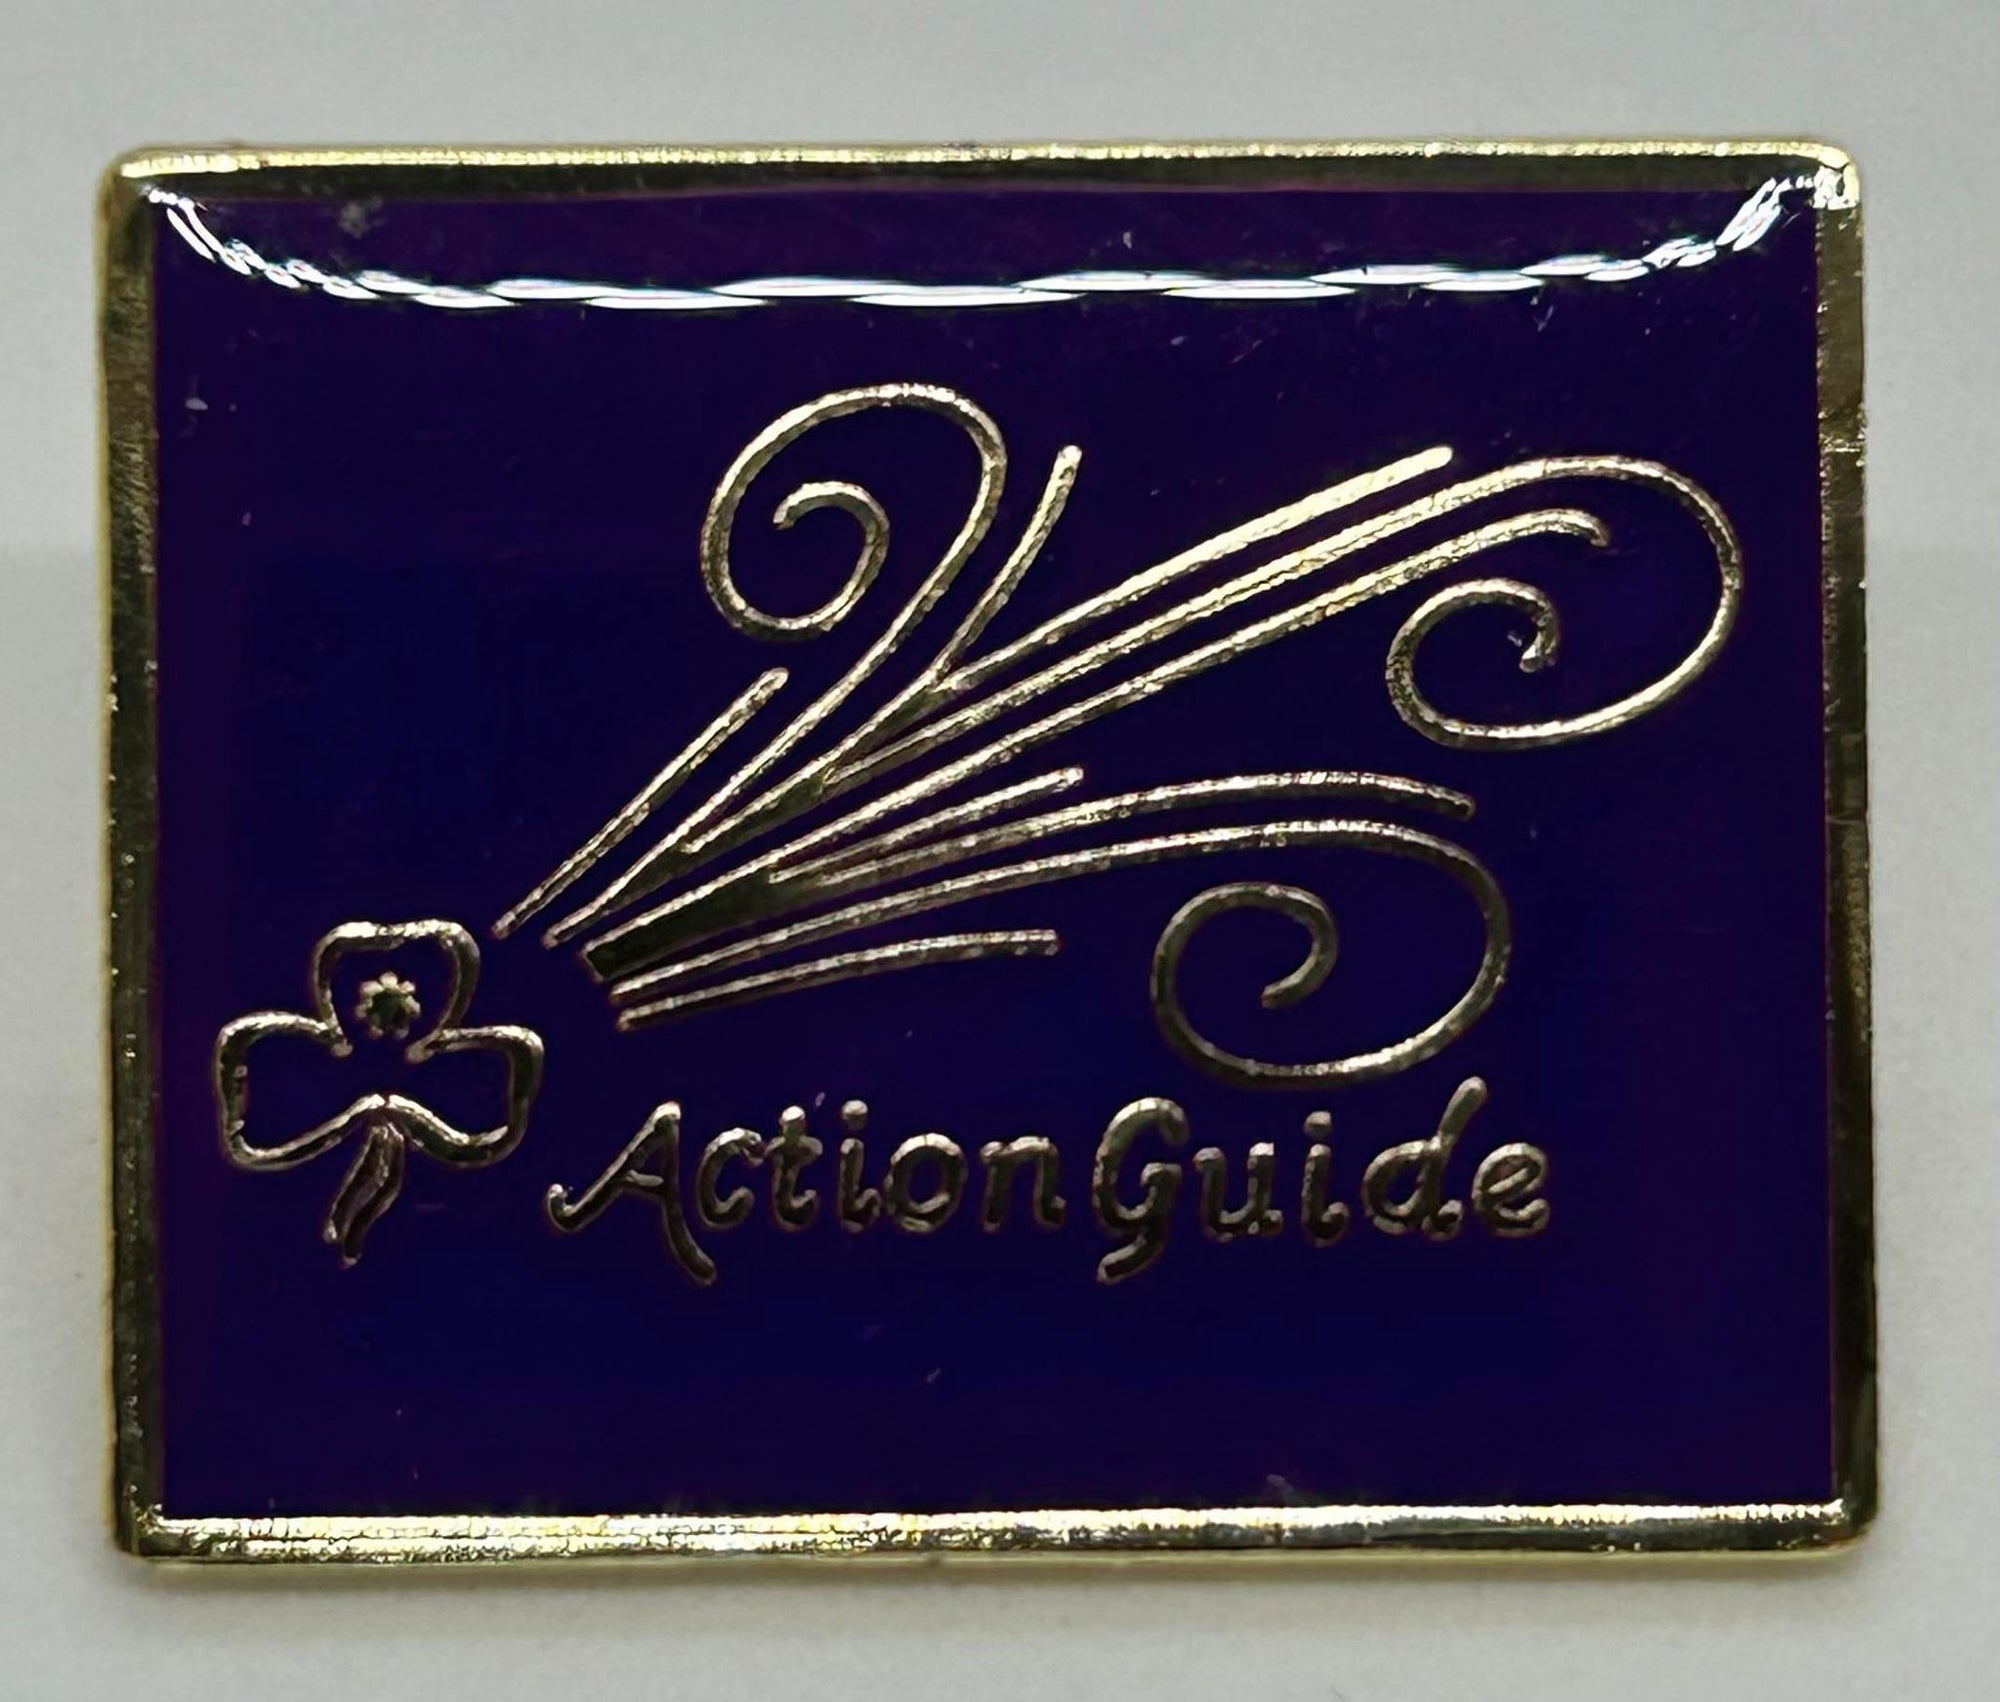 an enamel purple badge with the trefoil, swirls and  action guide on the front in gold